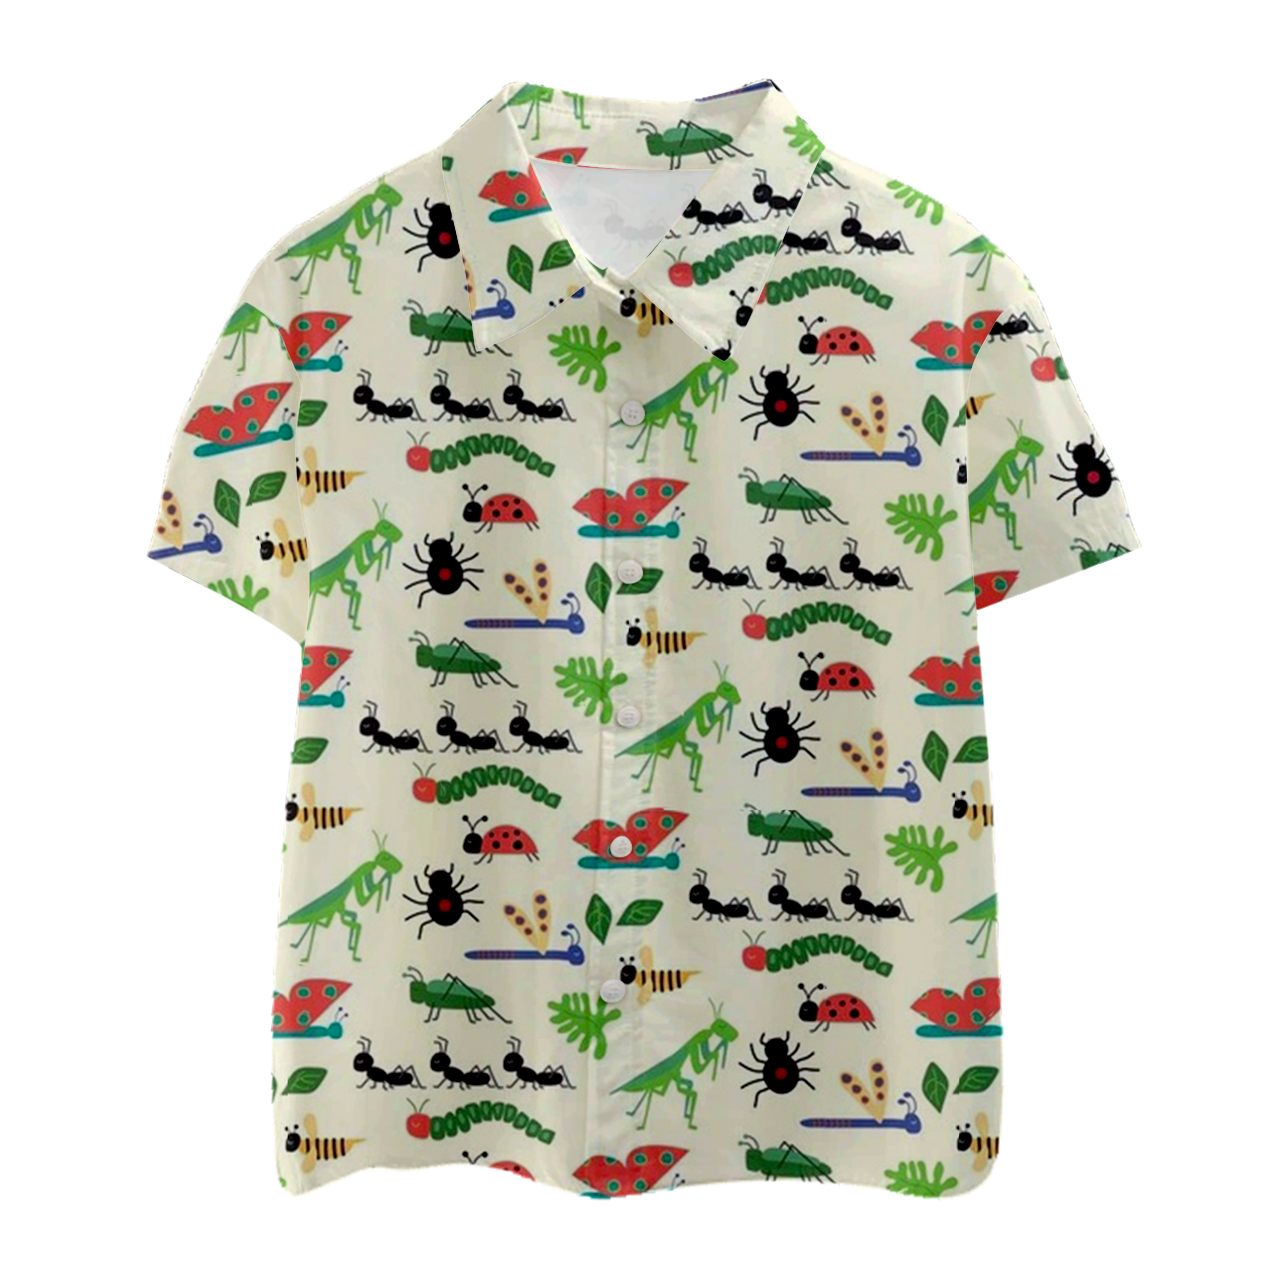 Insect Print Kids Button Shirt